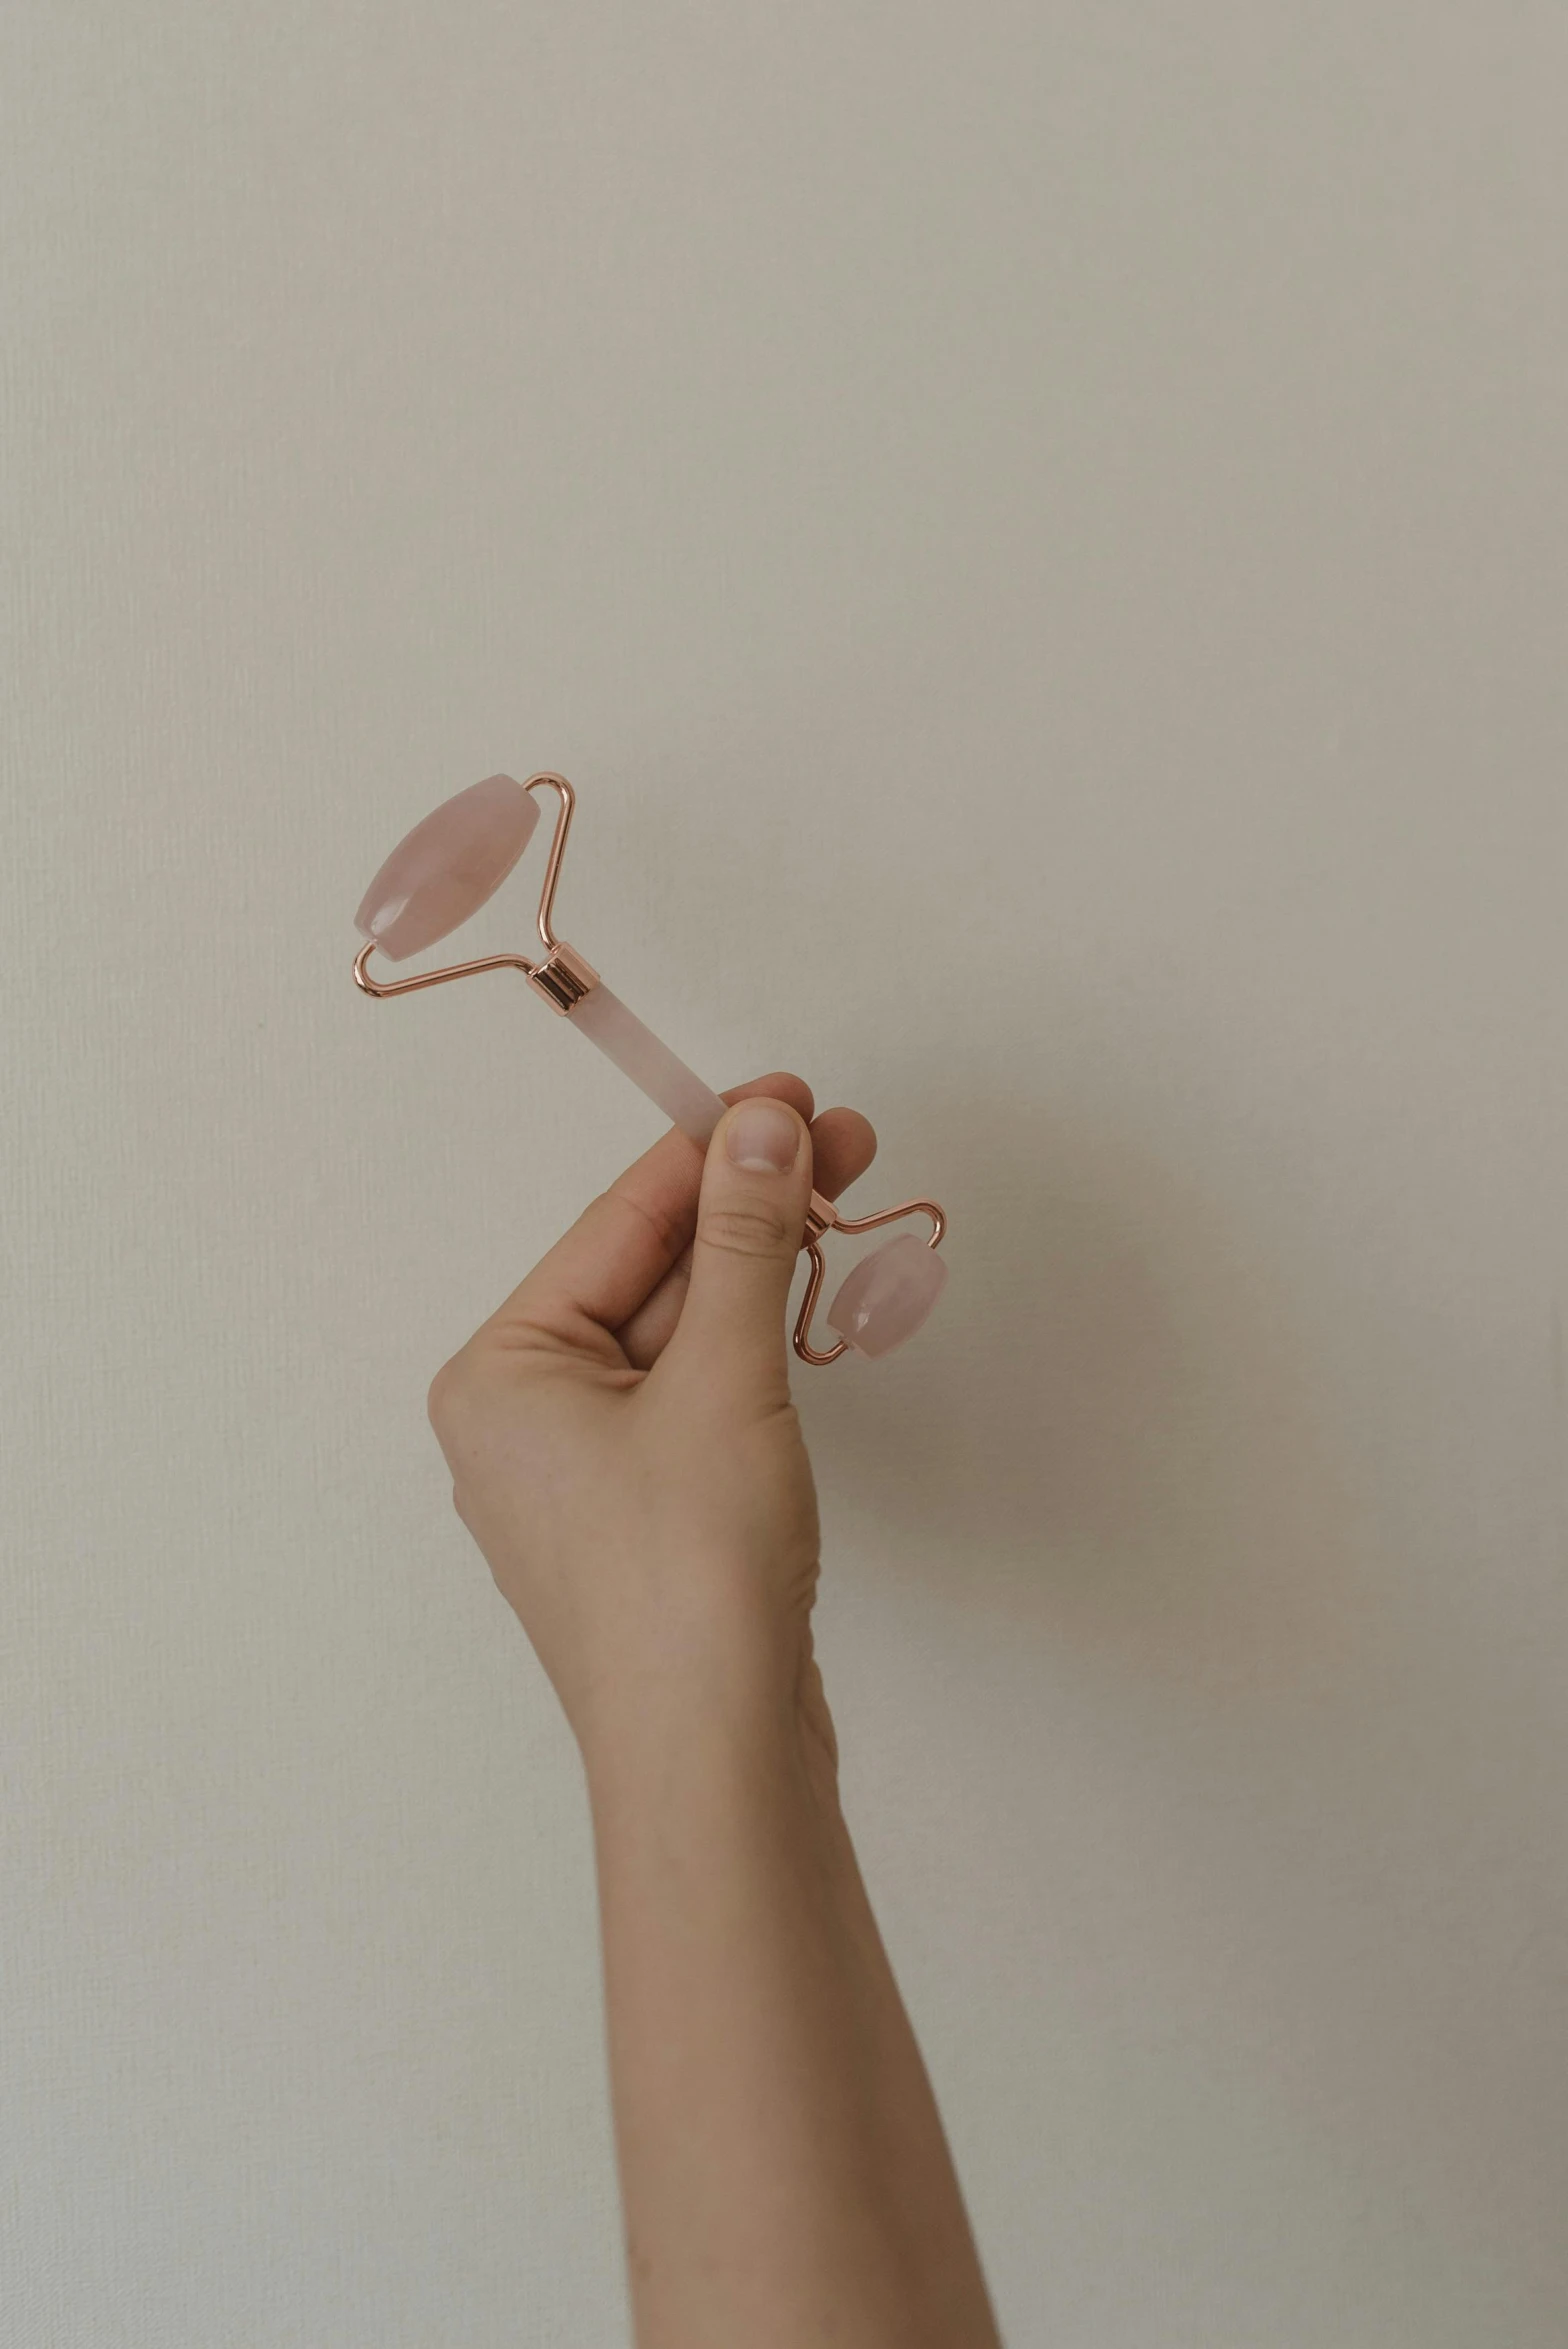 a person holding a pink object in their hand, by Emma Andijewska, trending on pexels, small square glasses, speculum, twirly, light tan